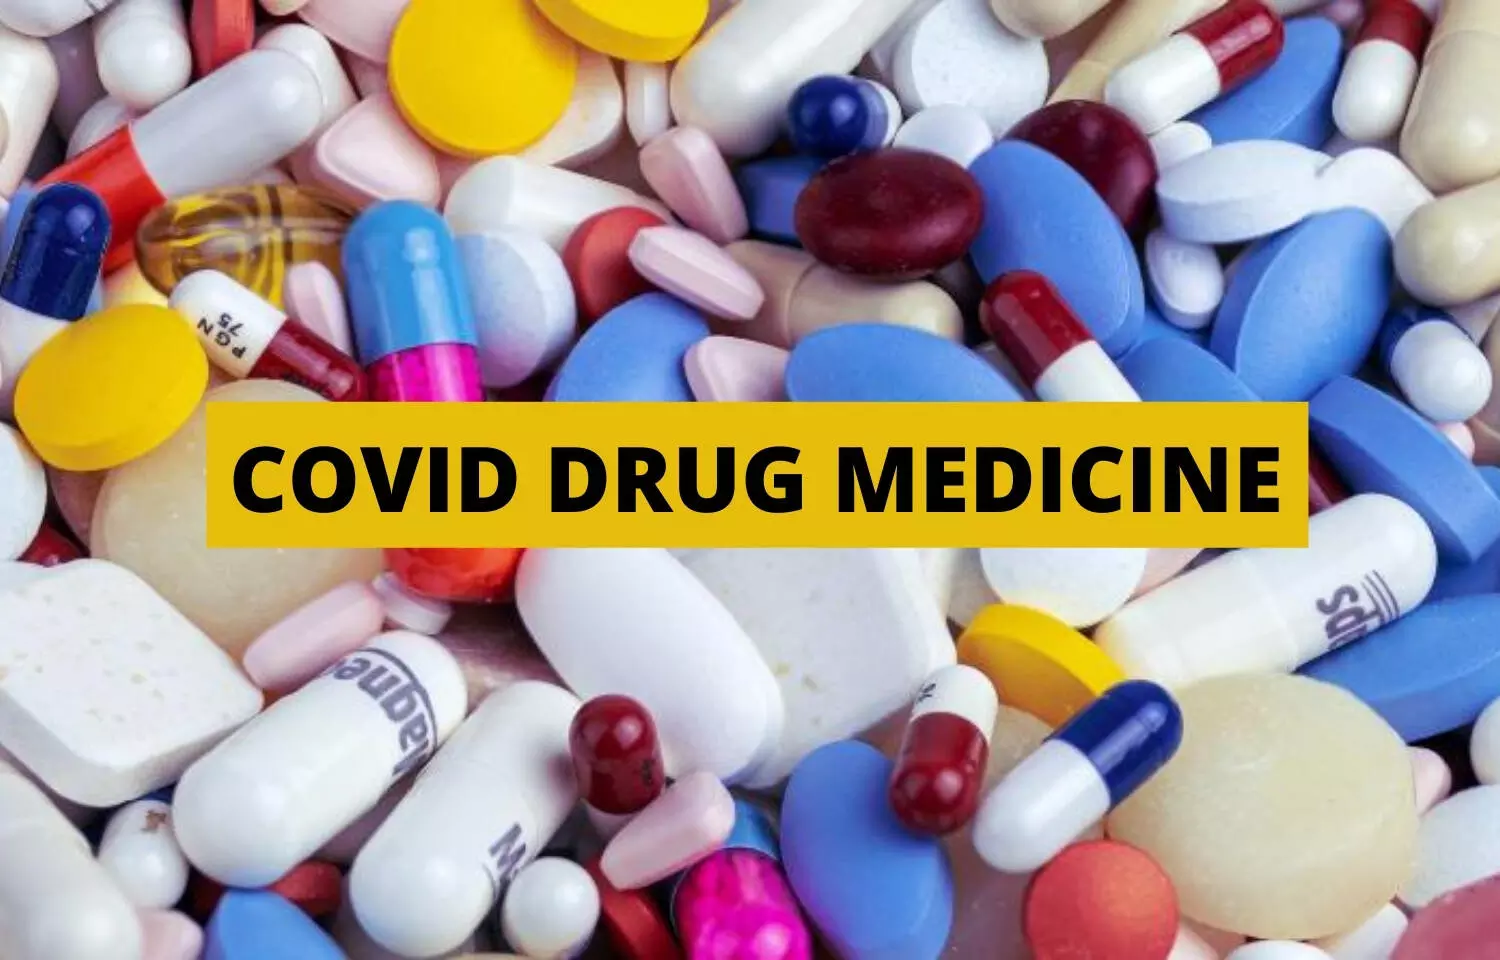 WHO recommends two new drugs to treat patients with COVID-19